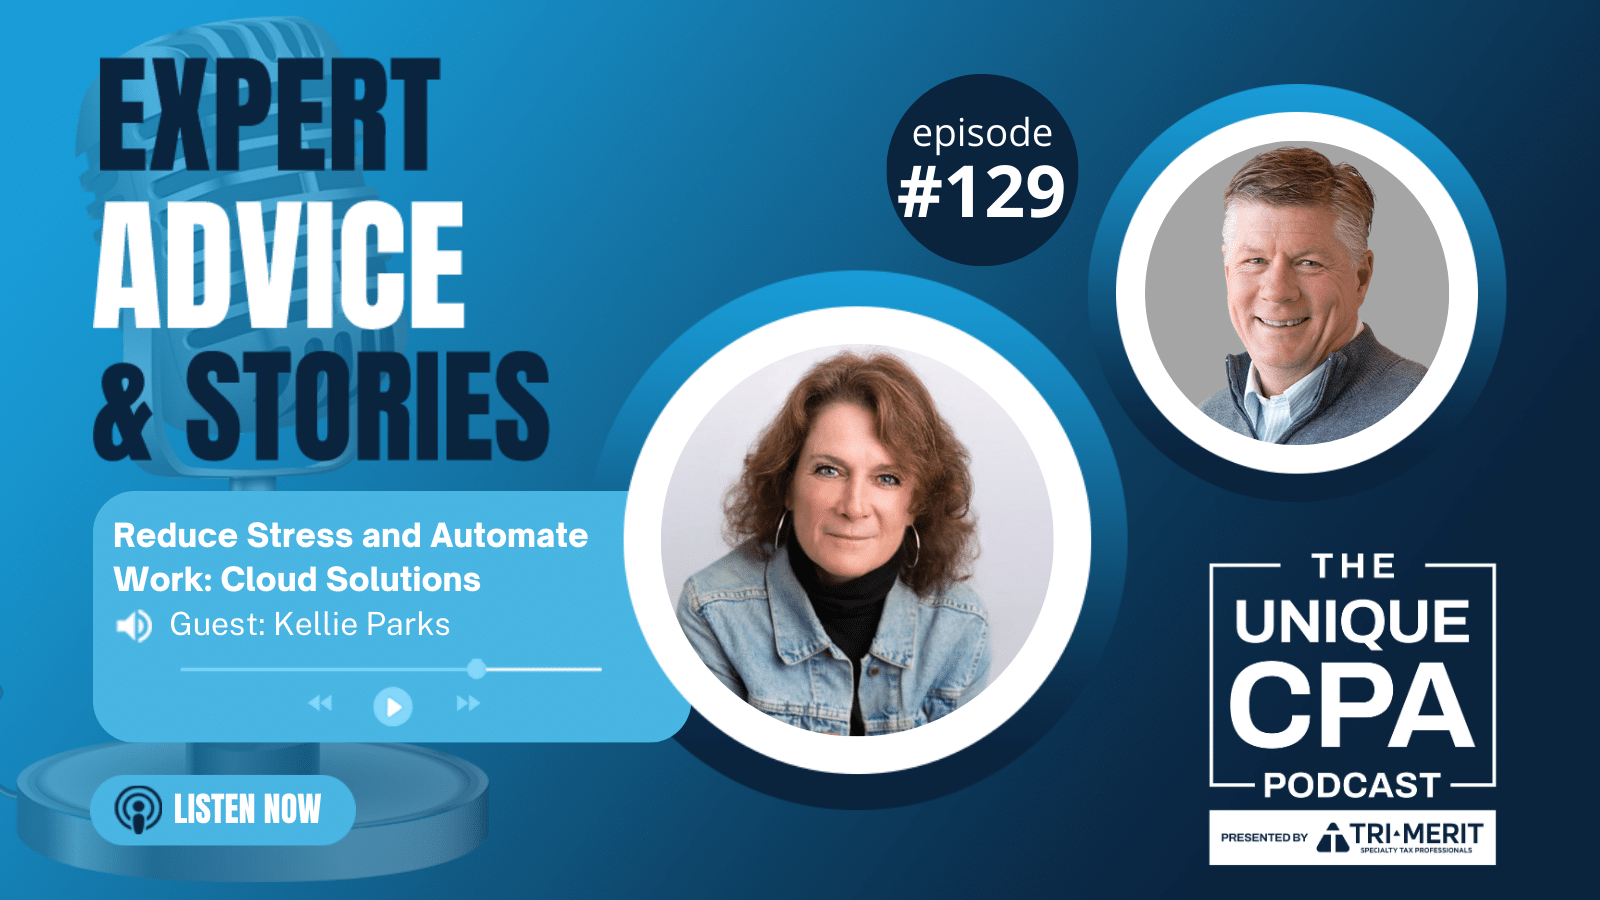 Unique Cpa Featured Image Ep 129 Kellie Parks - Reduce Stress And Automate Work - Tri-Merit